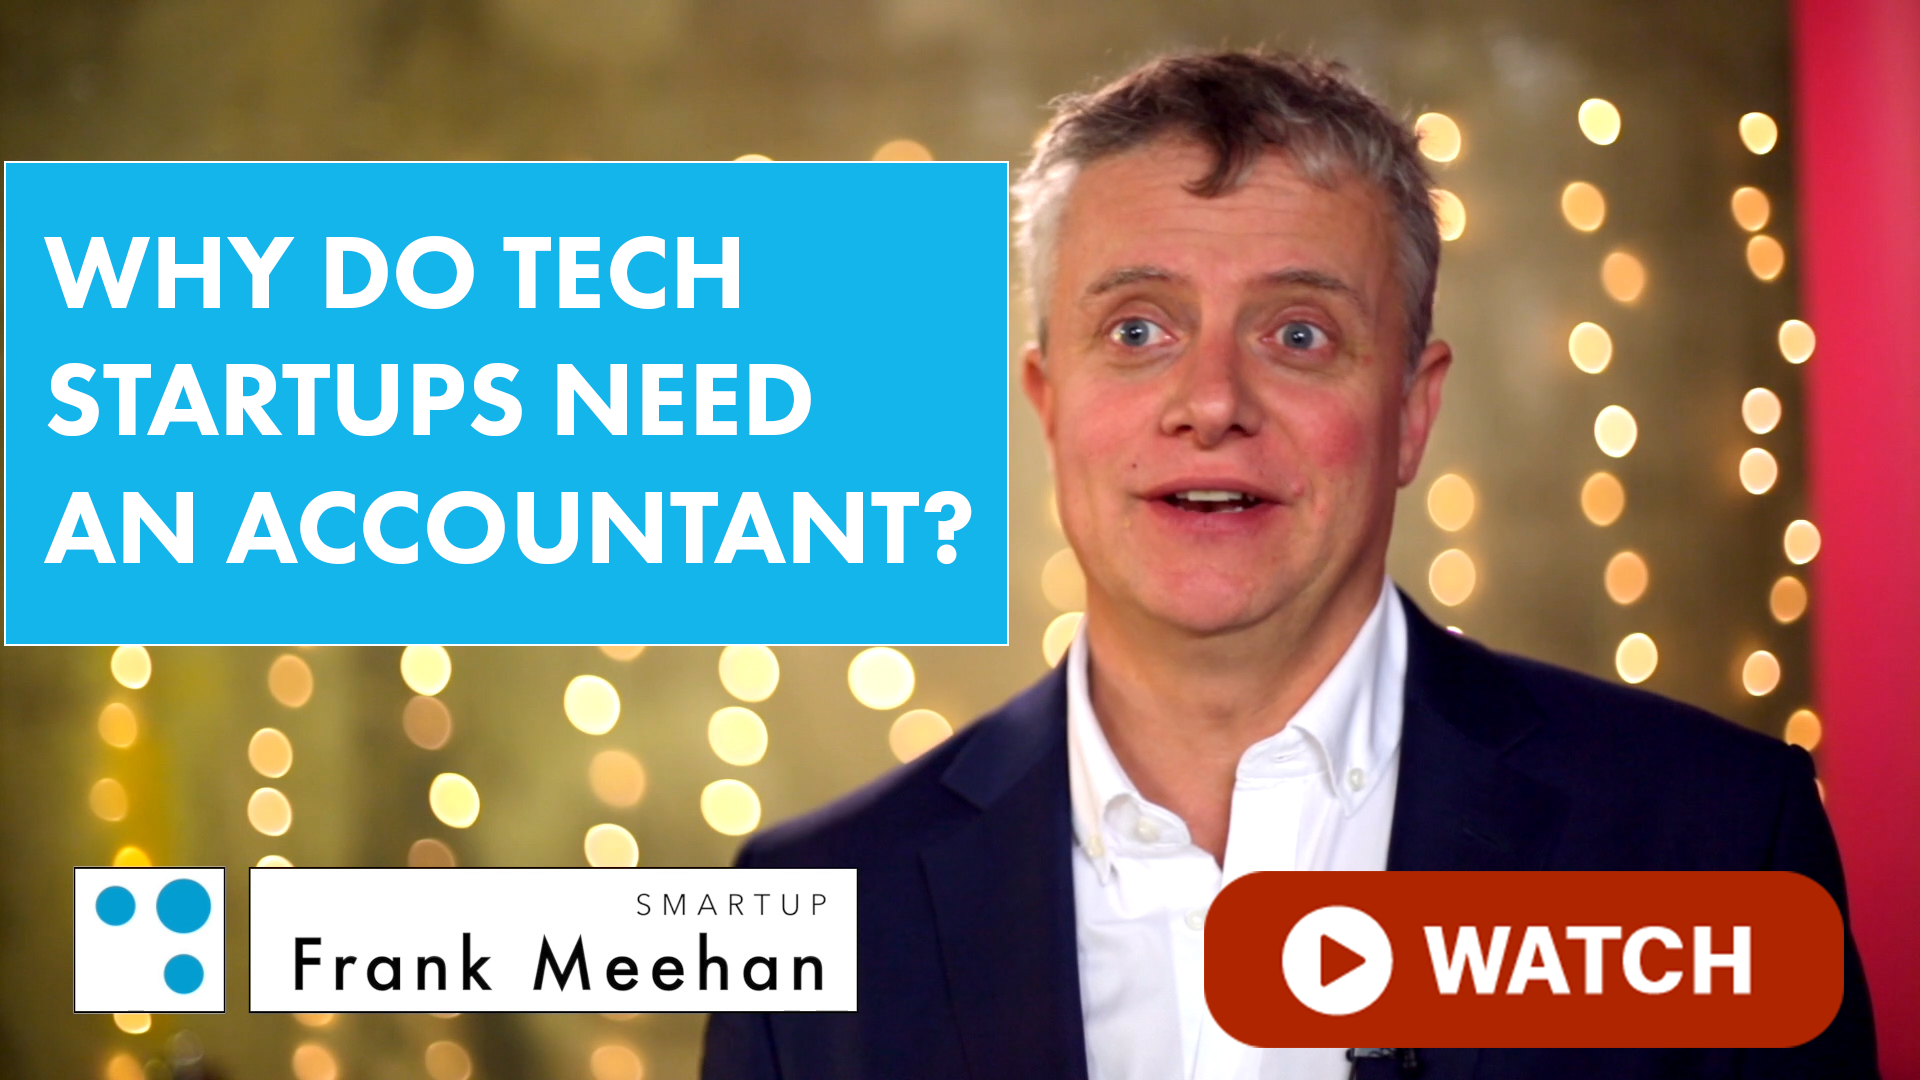 Why do tech startups need an accountant?